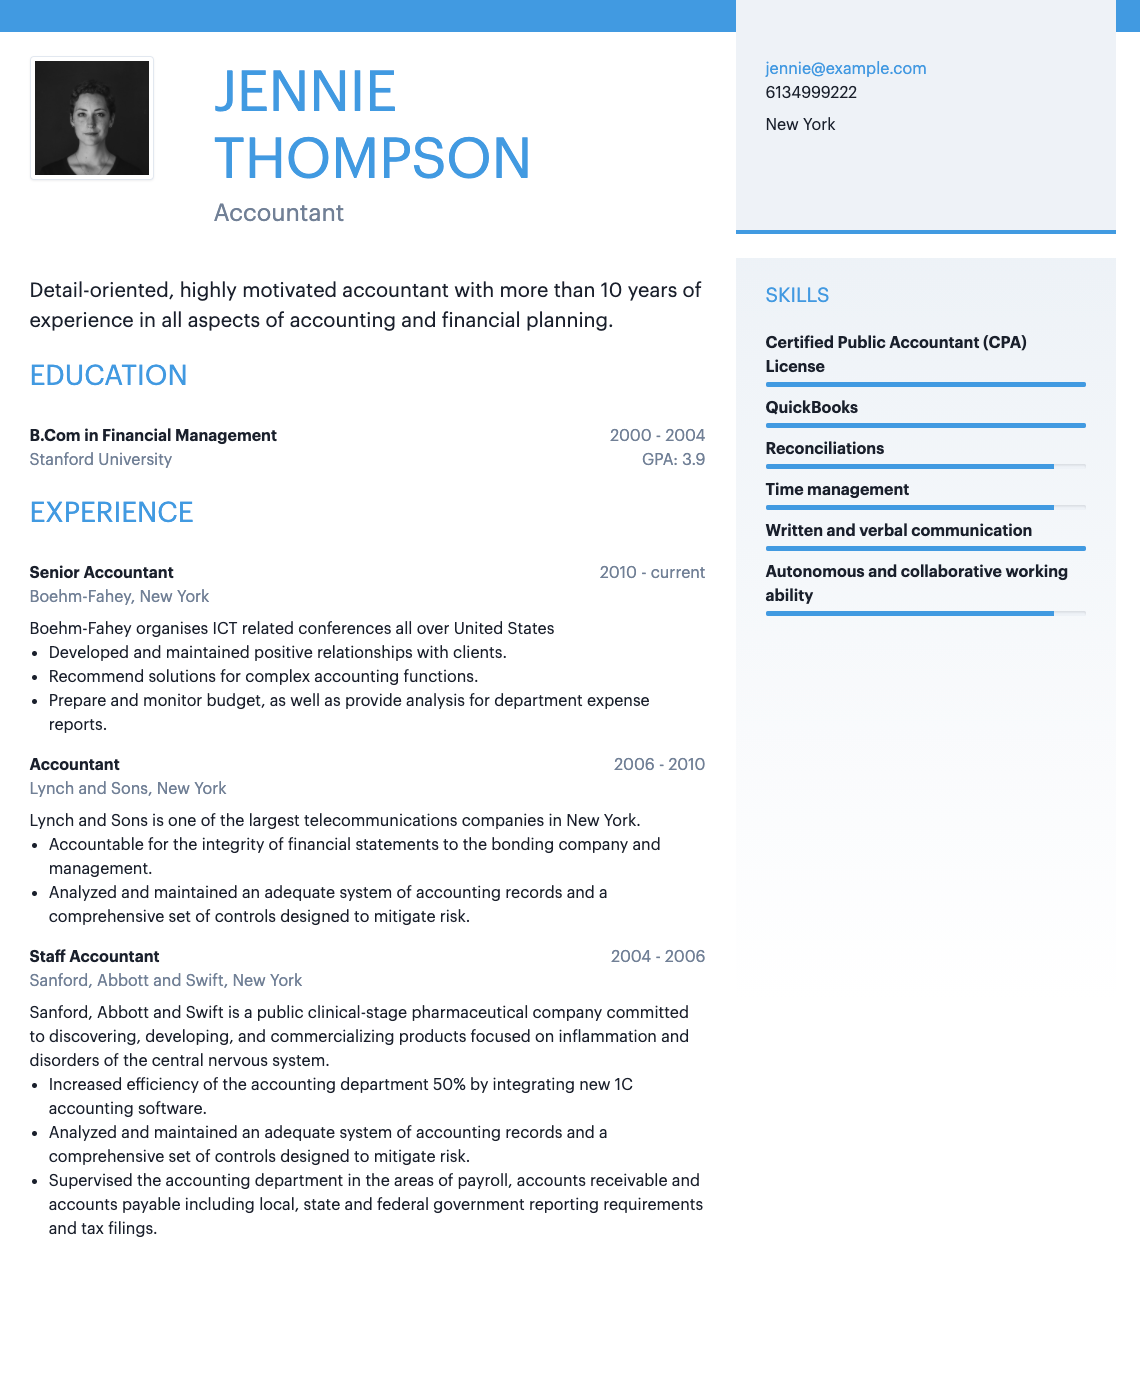 Shows one of the hipCV resume templates